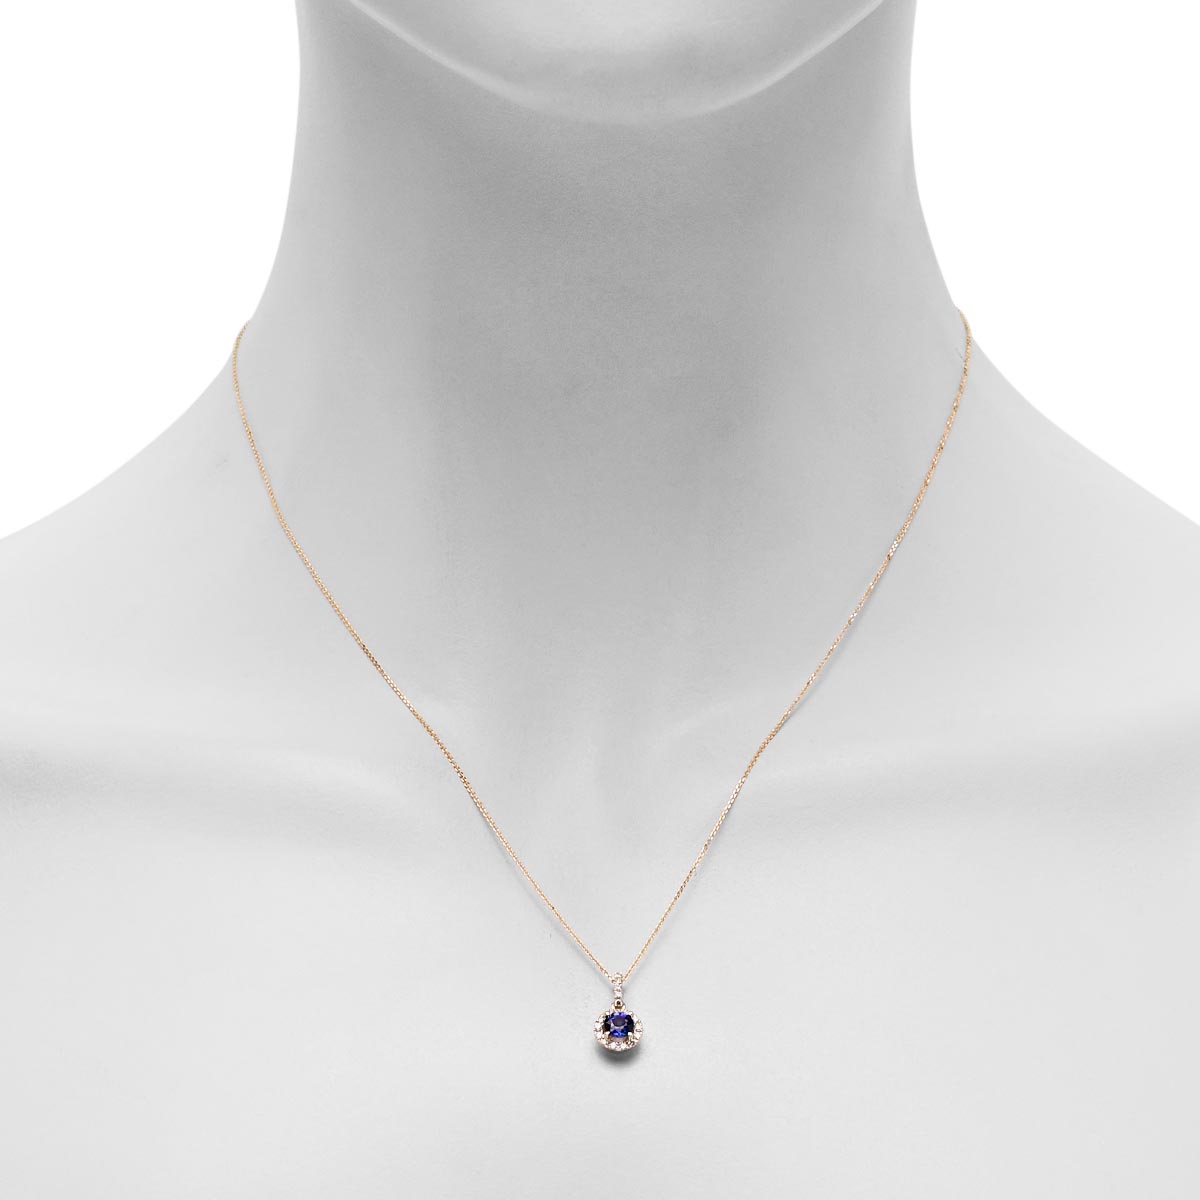 Sapphire Halo Necklace in 14kt Yellow Gold with Diamonds (1/7ct tw)